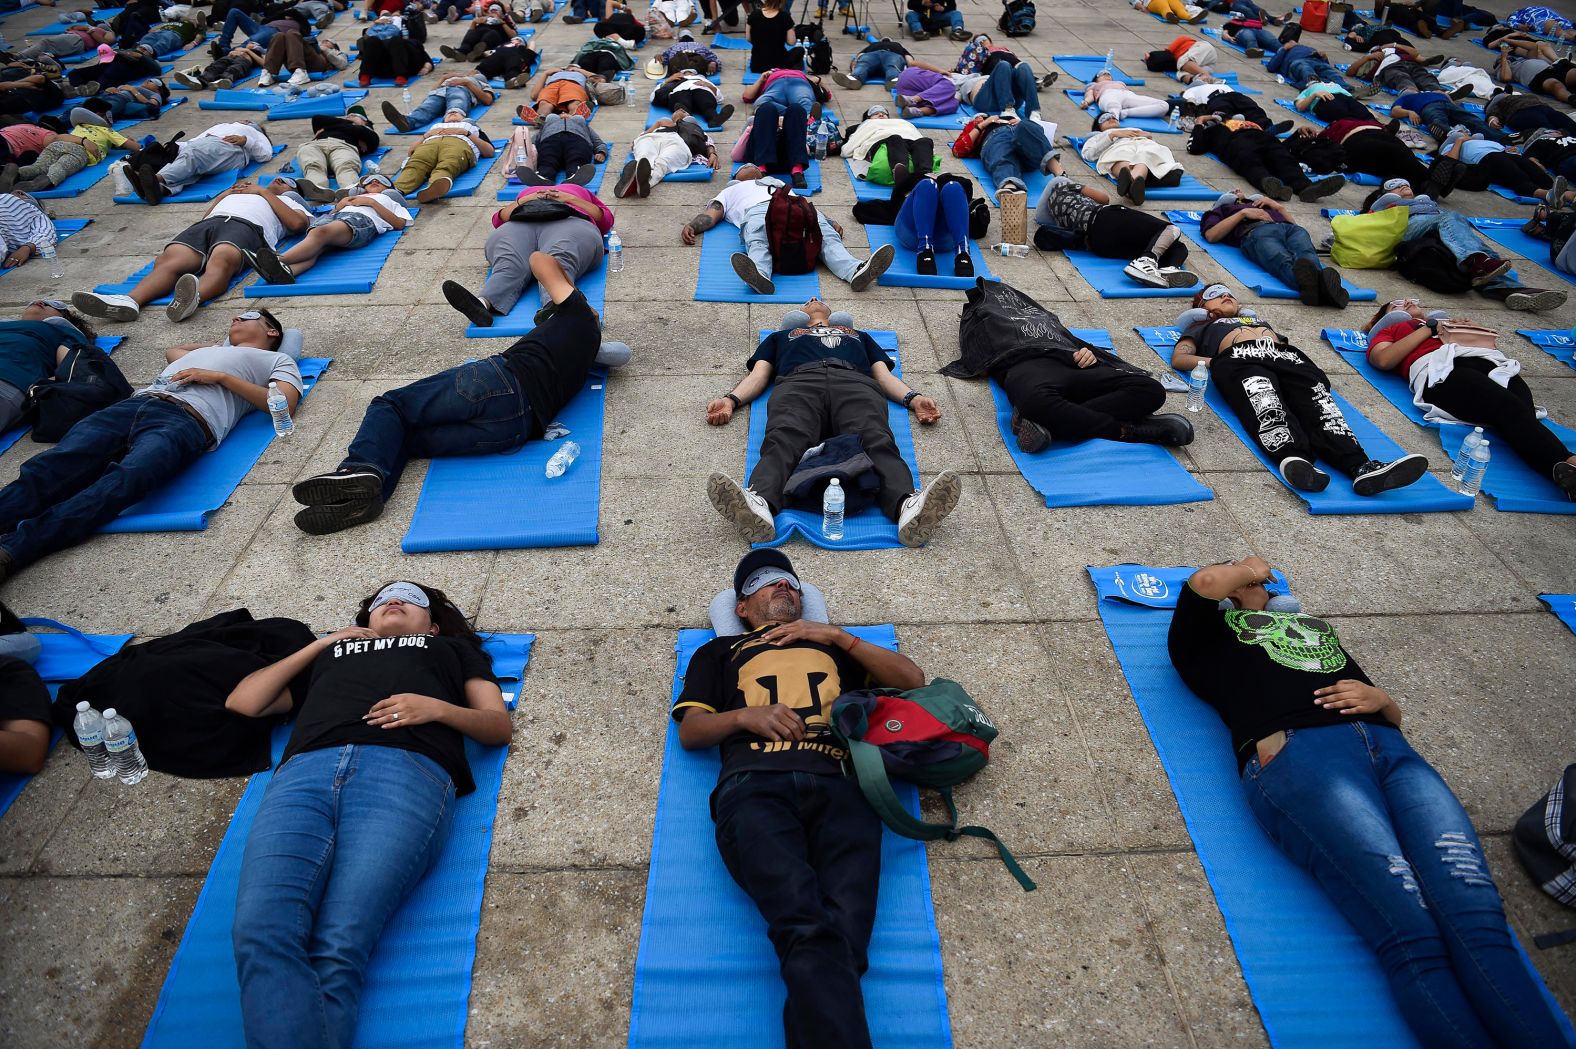 People nap during a World Sleep Day event in Mexico City on Friday, March 15.